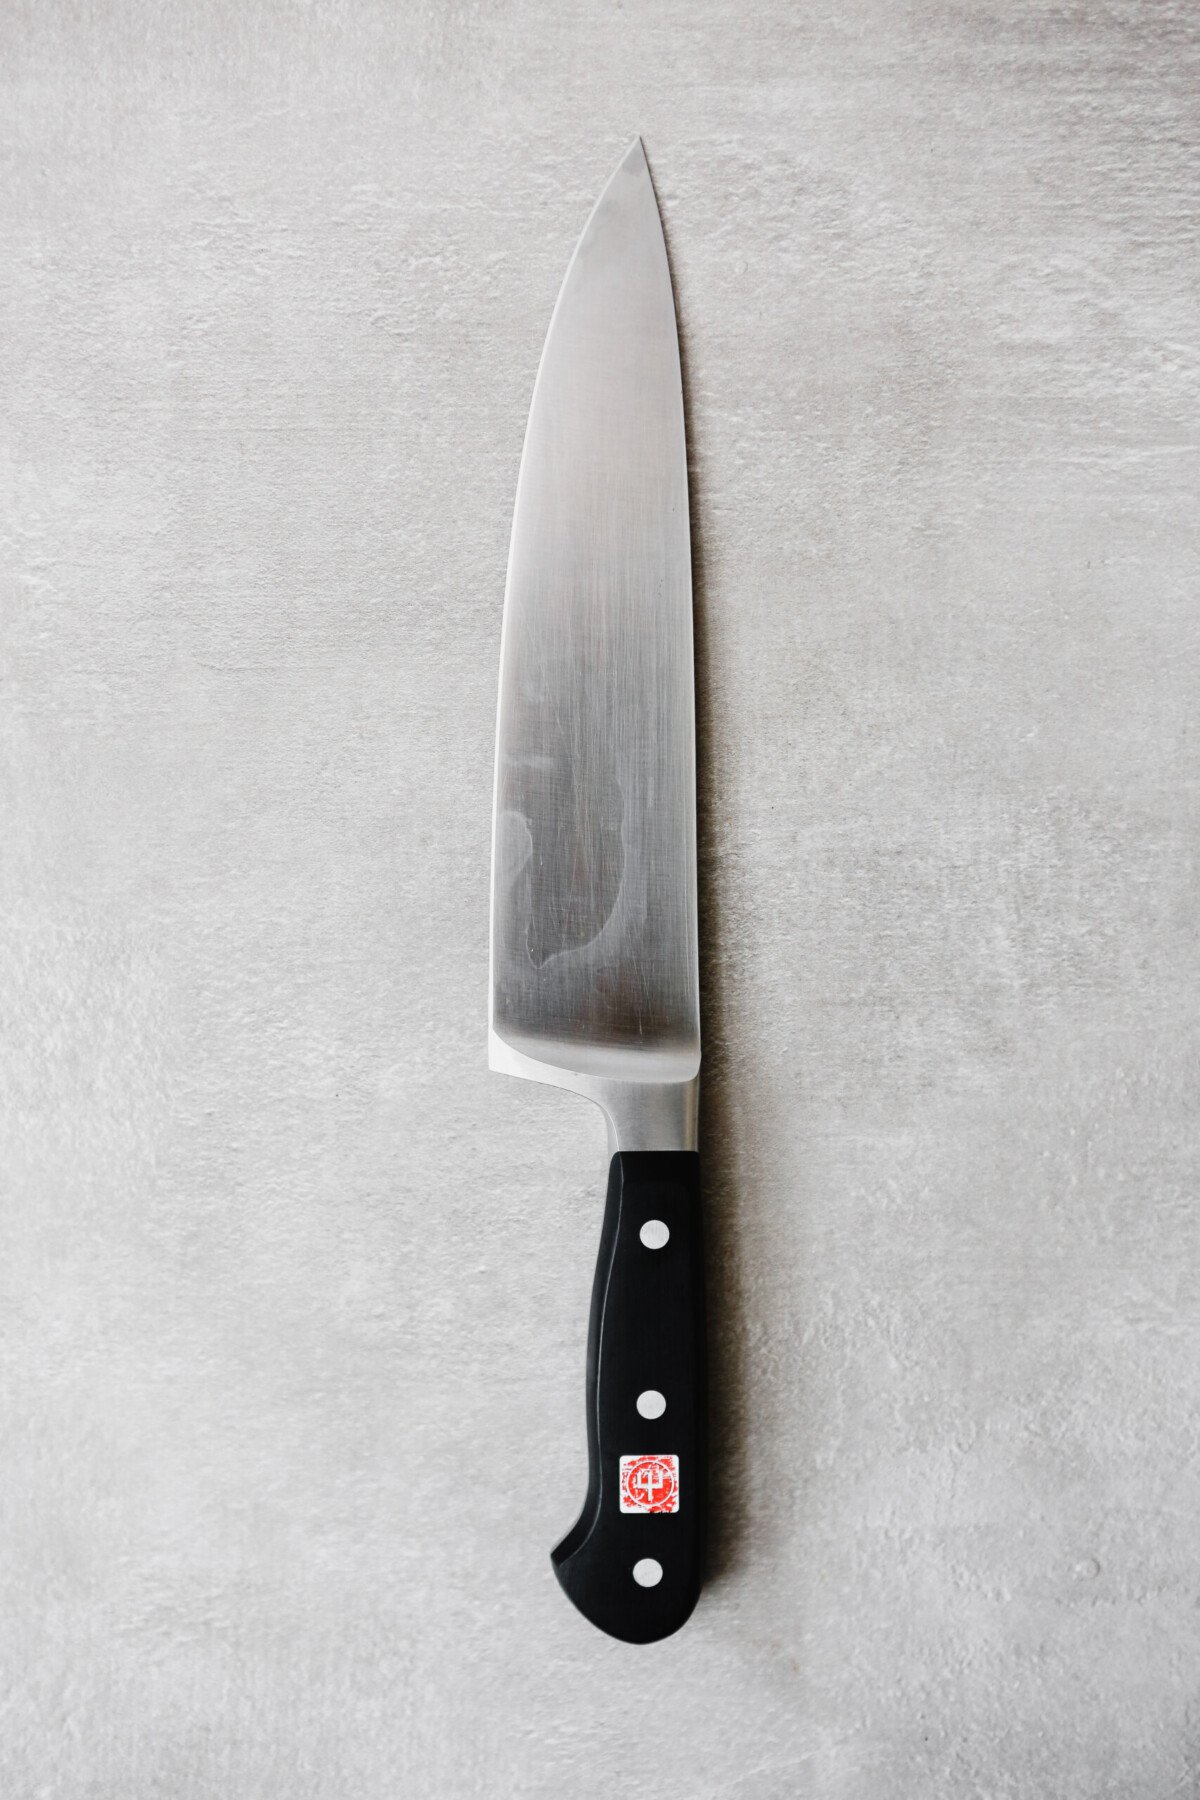 Photograph of a chefs knife on a gray table